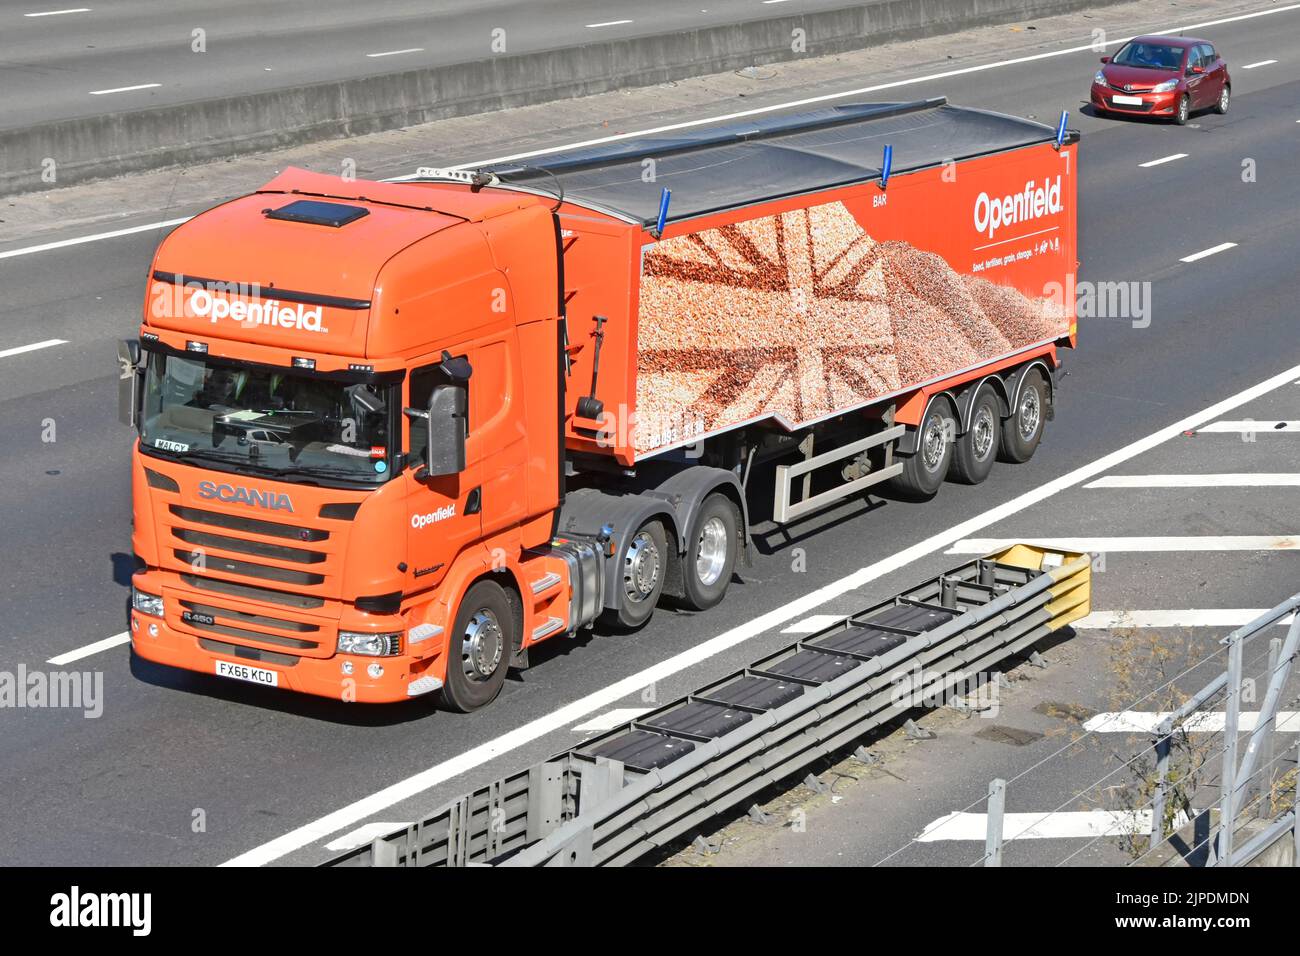 Openfield hgv lorry truck British grain marketing & arable inputs co-operative business brand logo on covered articulated trailer on UK motorway road Stock Photo